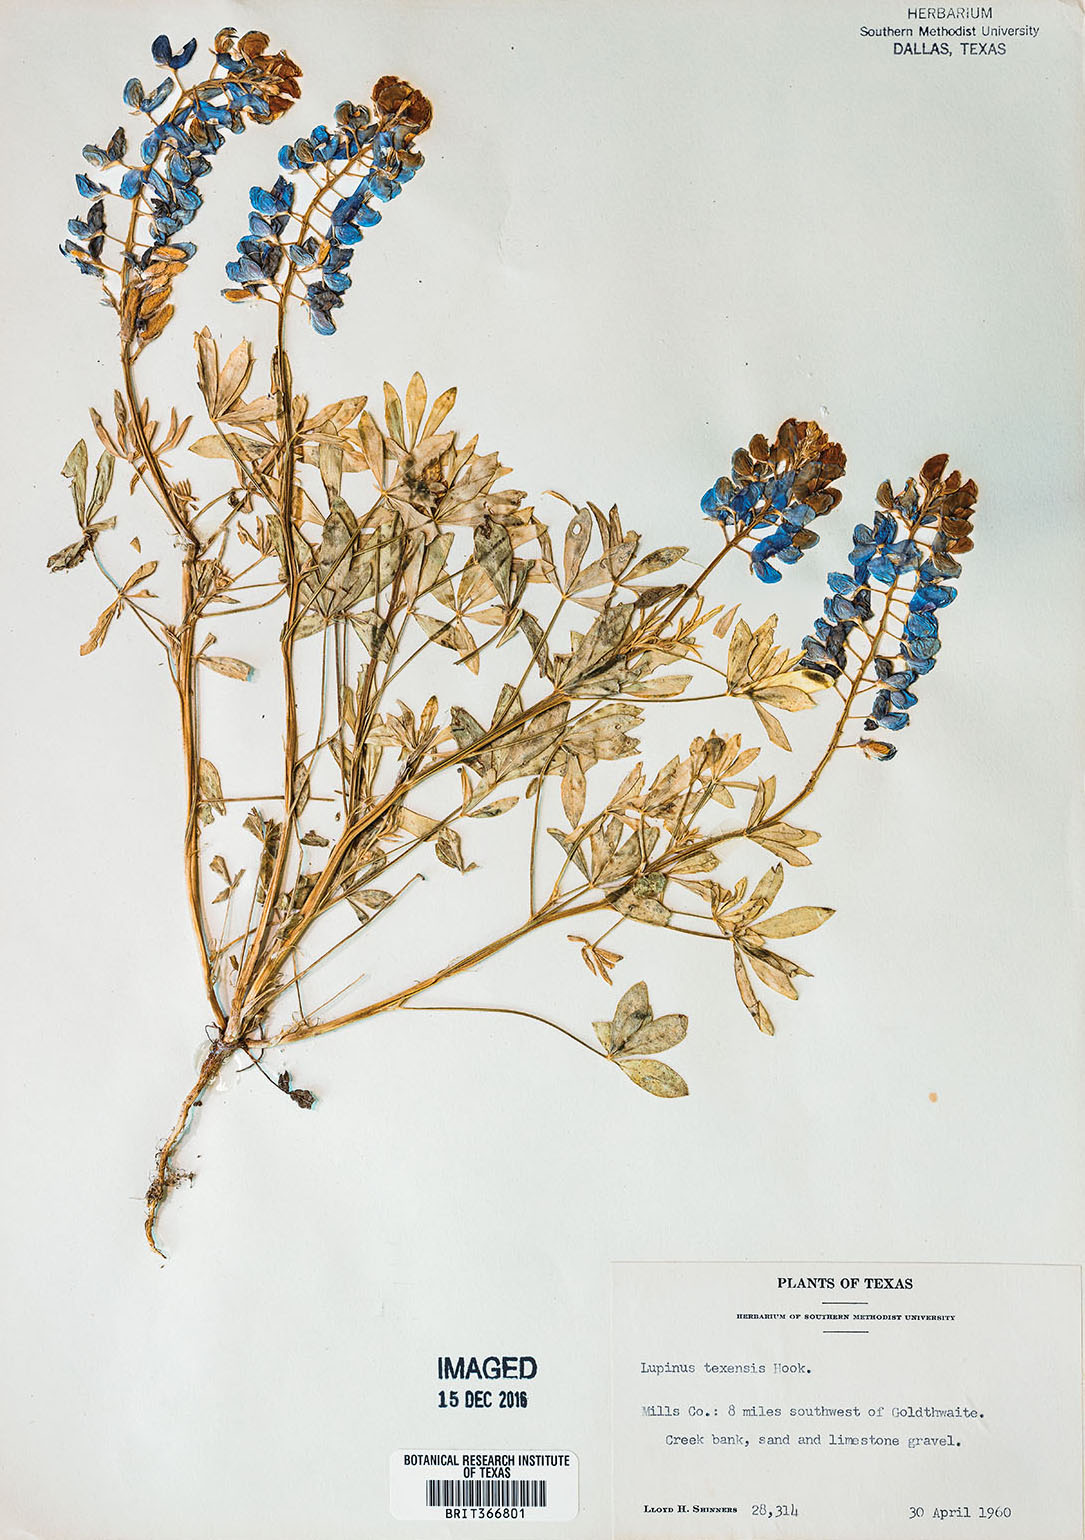 An image of a pressed bluebonnet on greyish paper